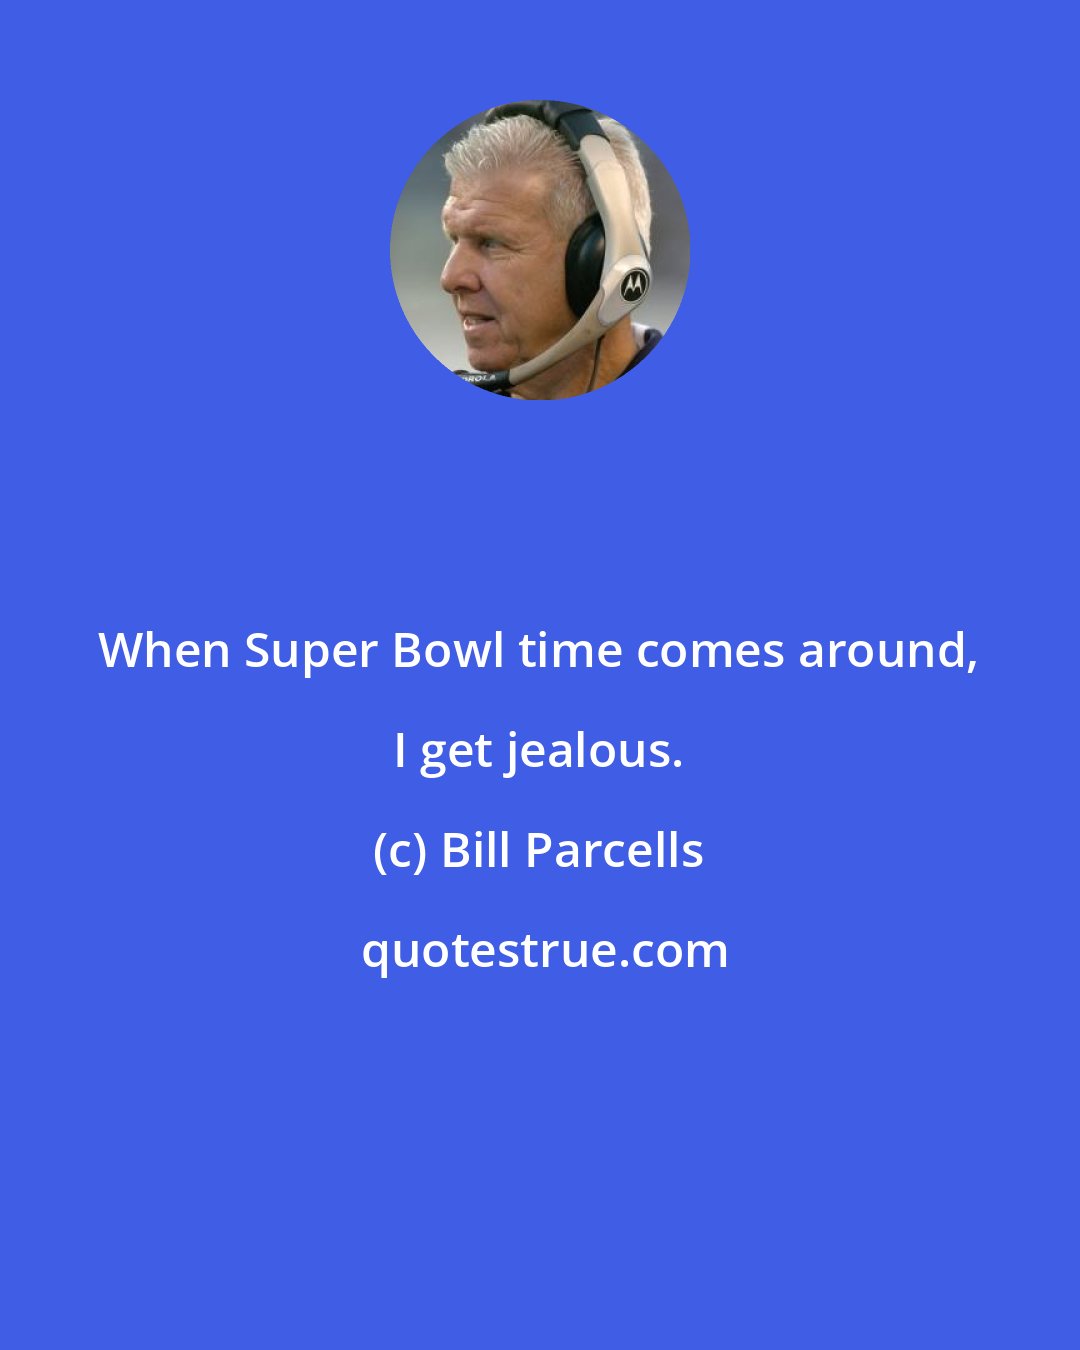 Bill Parcells: When Super Bowl time comes around, I get jealous.